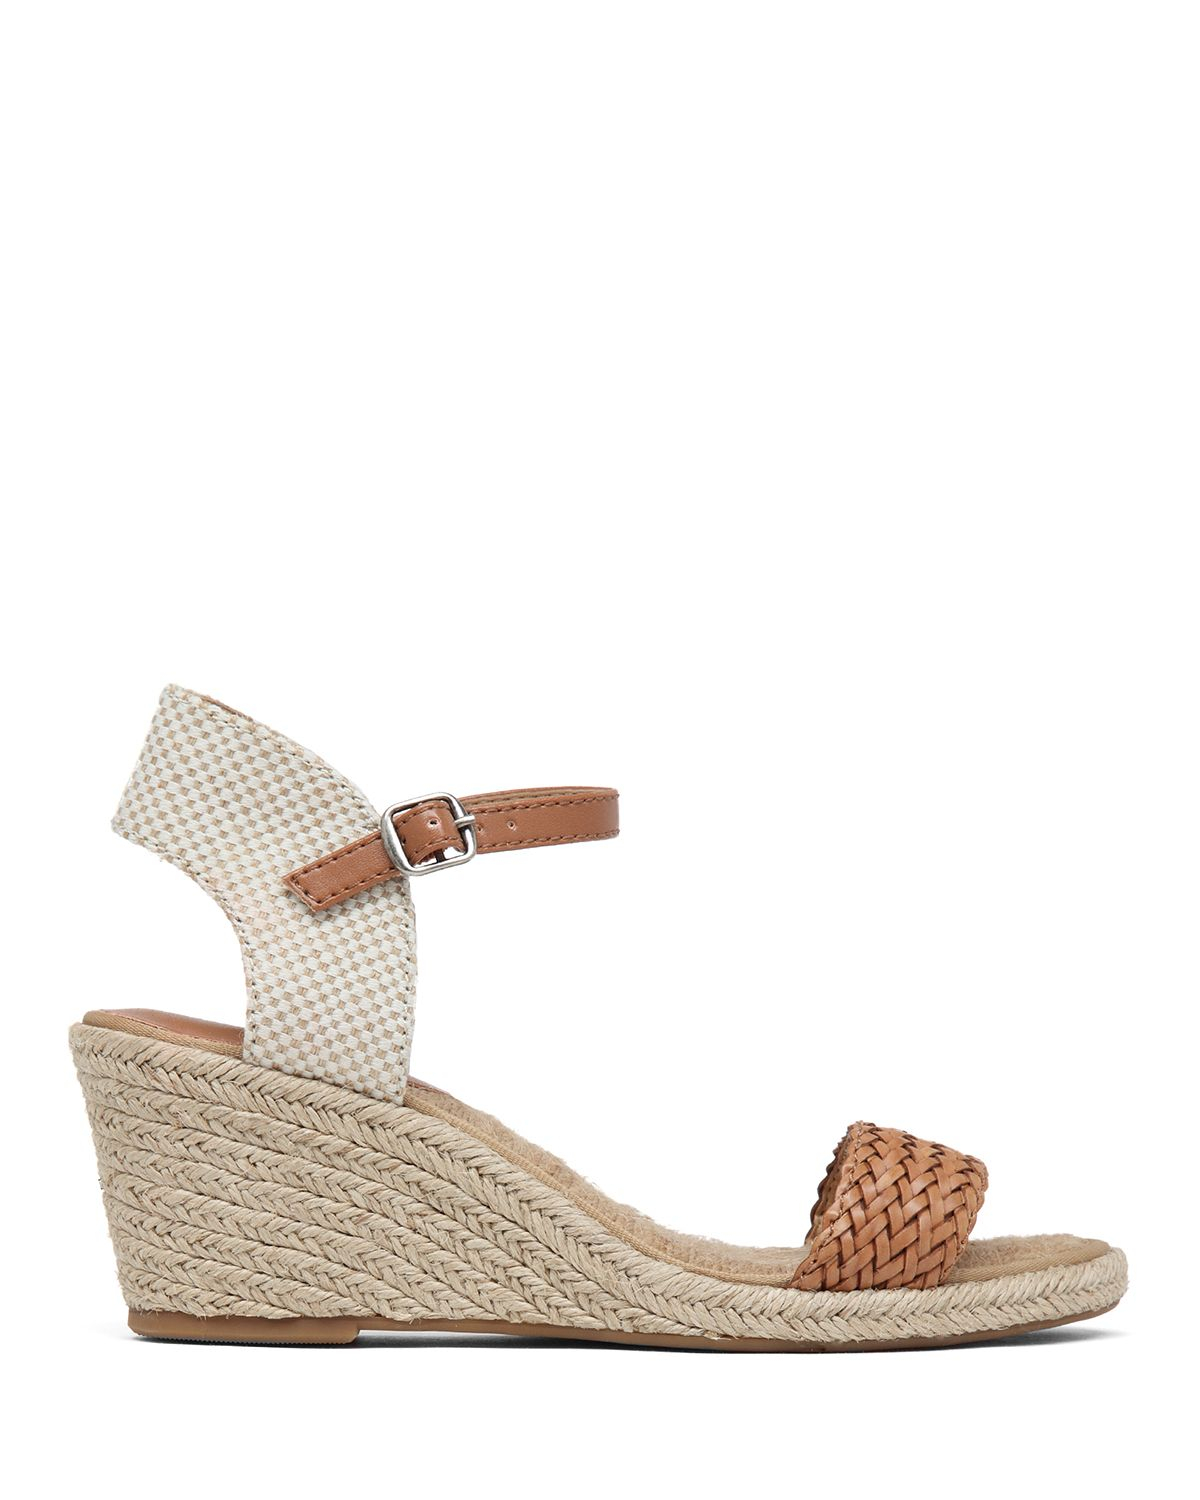 Lucky brand Espadrille Wedge Sandals - Kavelli Woven in Blue | Lyst